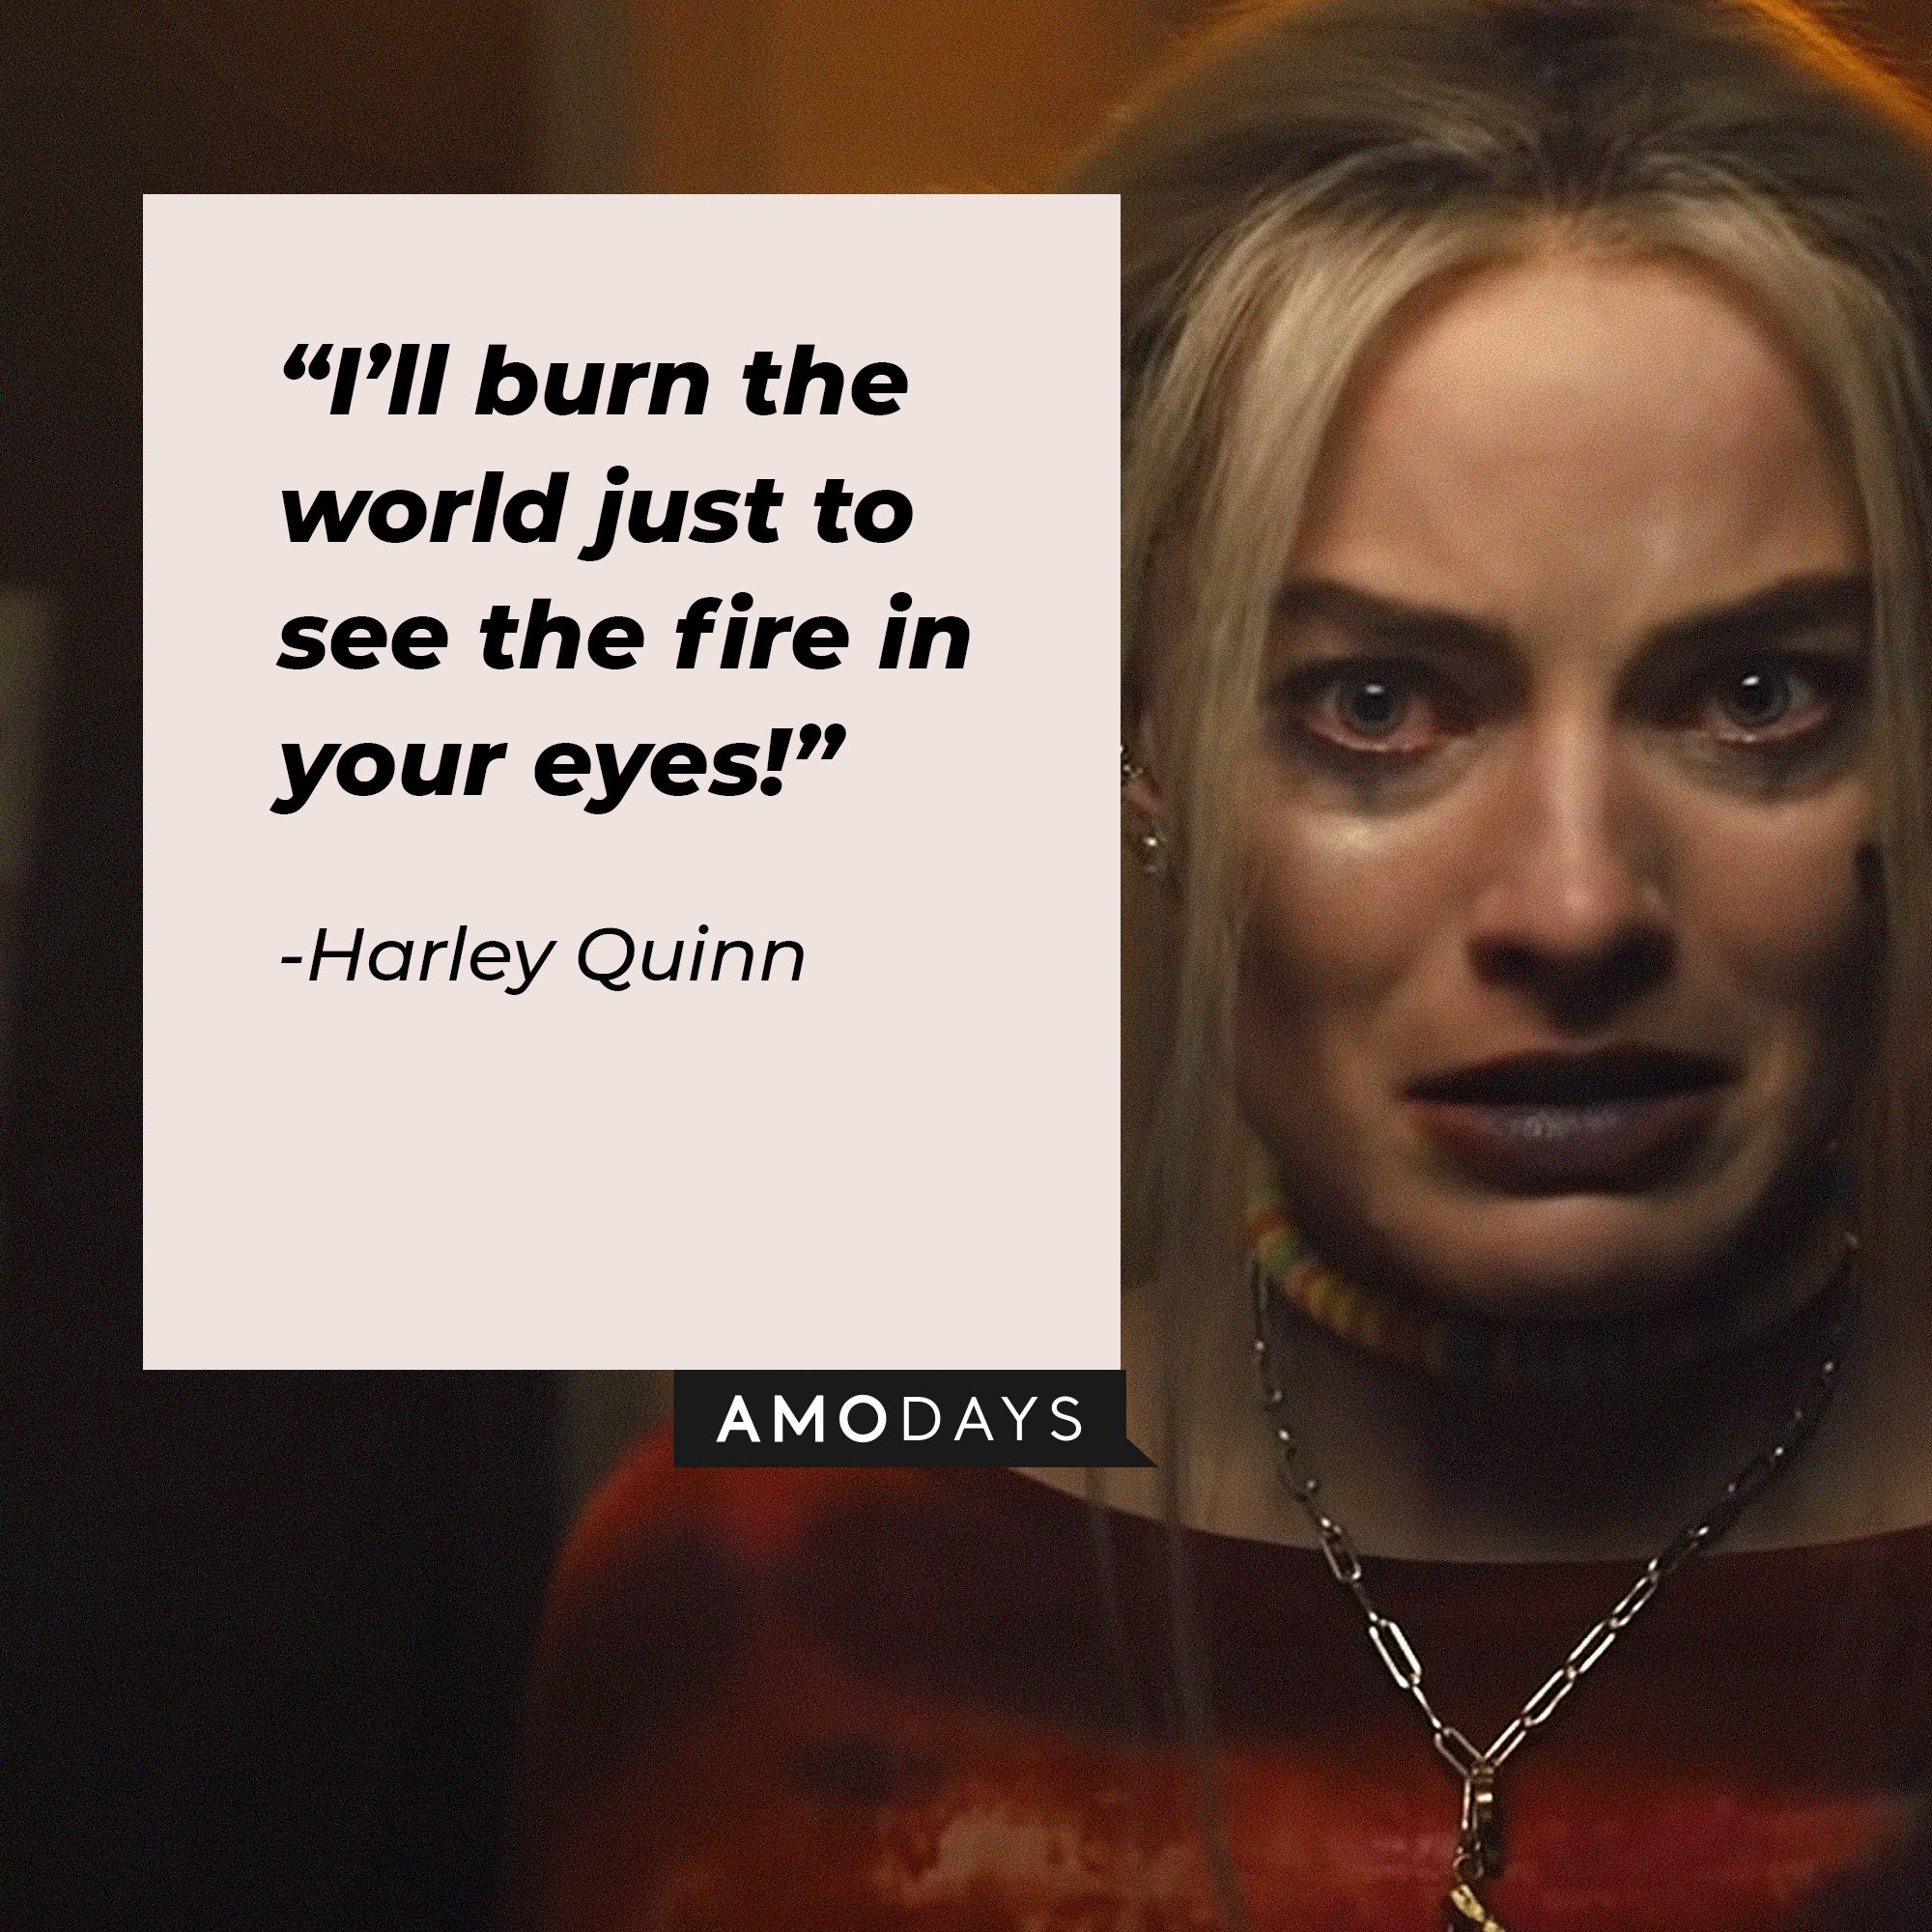 Harley Quinn’s quote: “I’ll burn the world just to see the fire in your eyes!” |  Source: Image: AmoDays